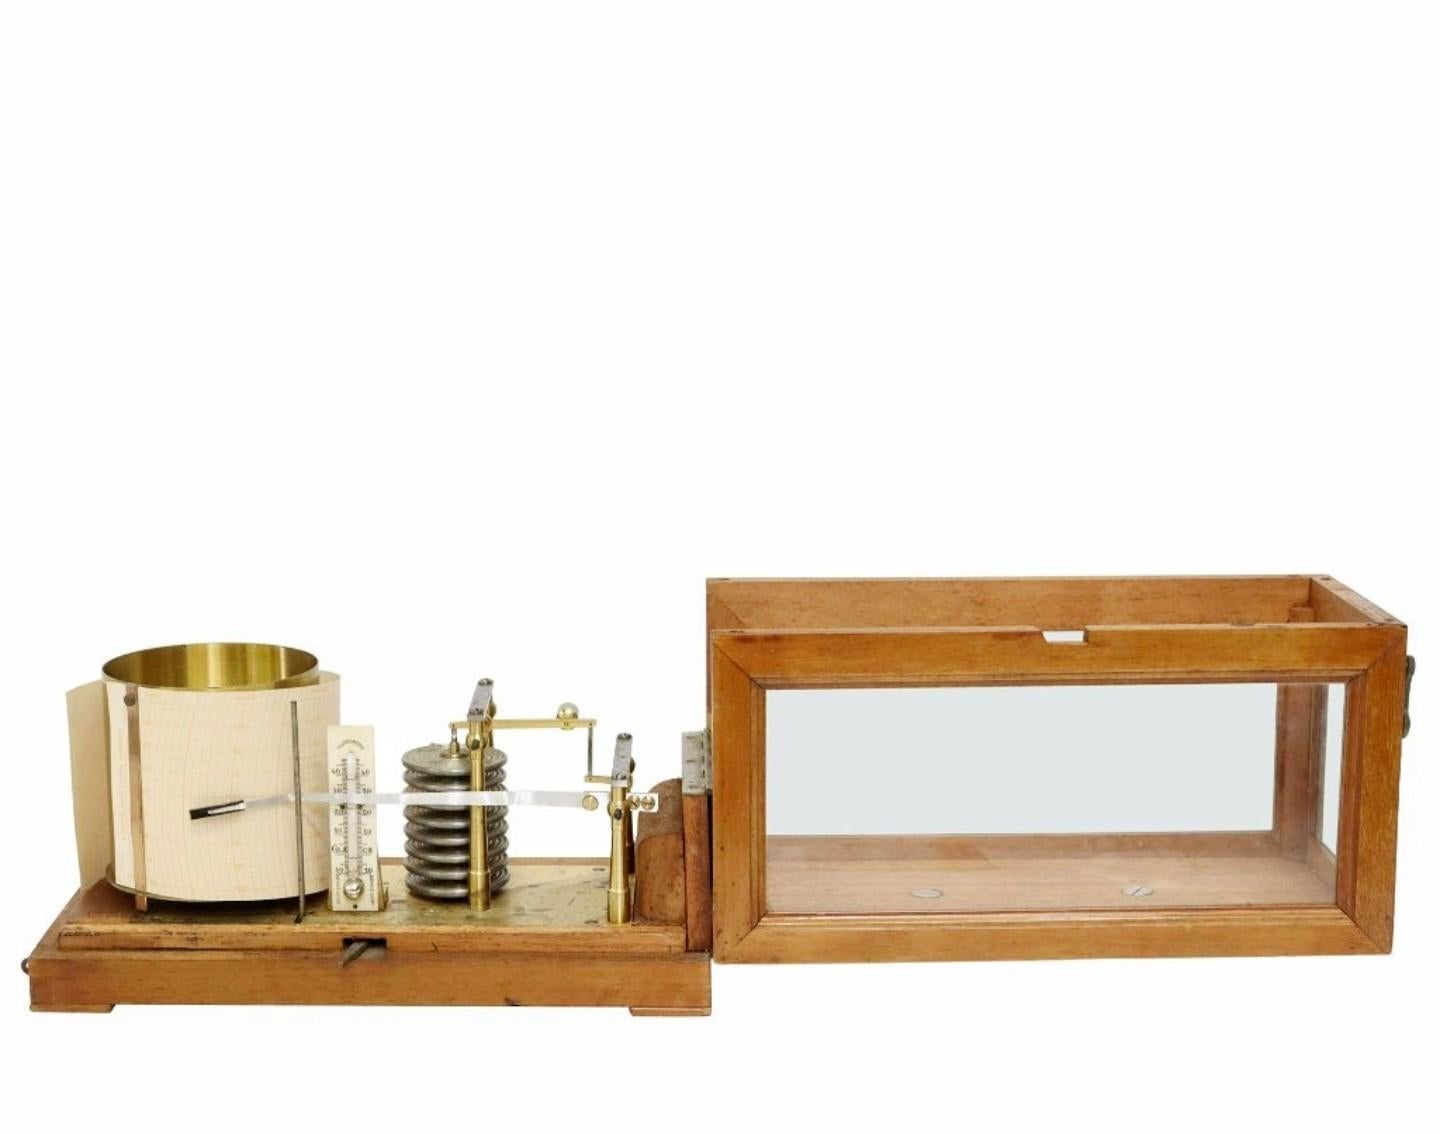 A rare and interesting French mahogany-cased barograph by Richard Jules. circa 1900

Exquisitely handcrafted in Paris, France, in the early 20th century, this fine weather forecasting scientific instrument is a barometer that records the